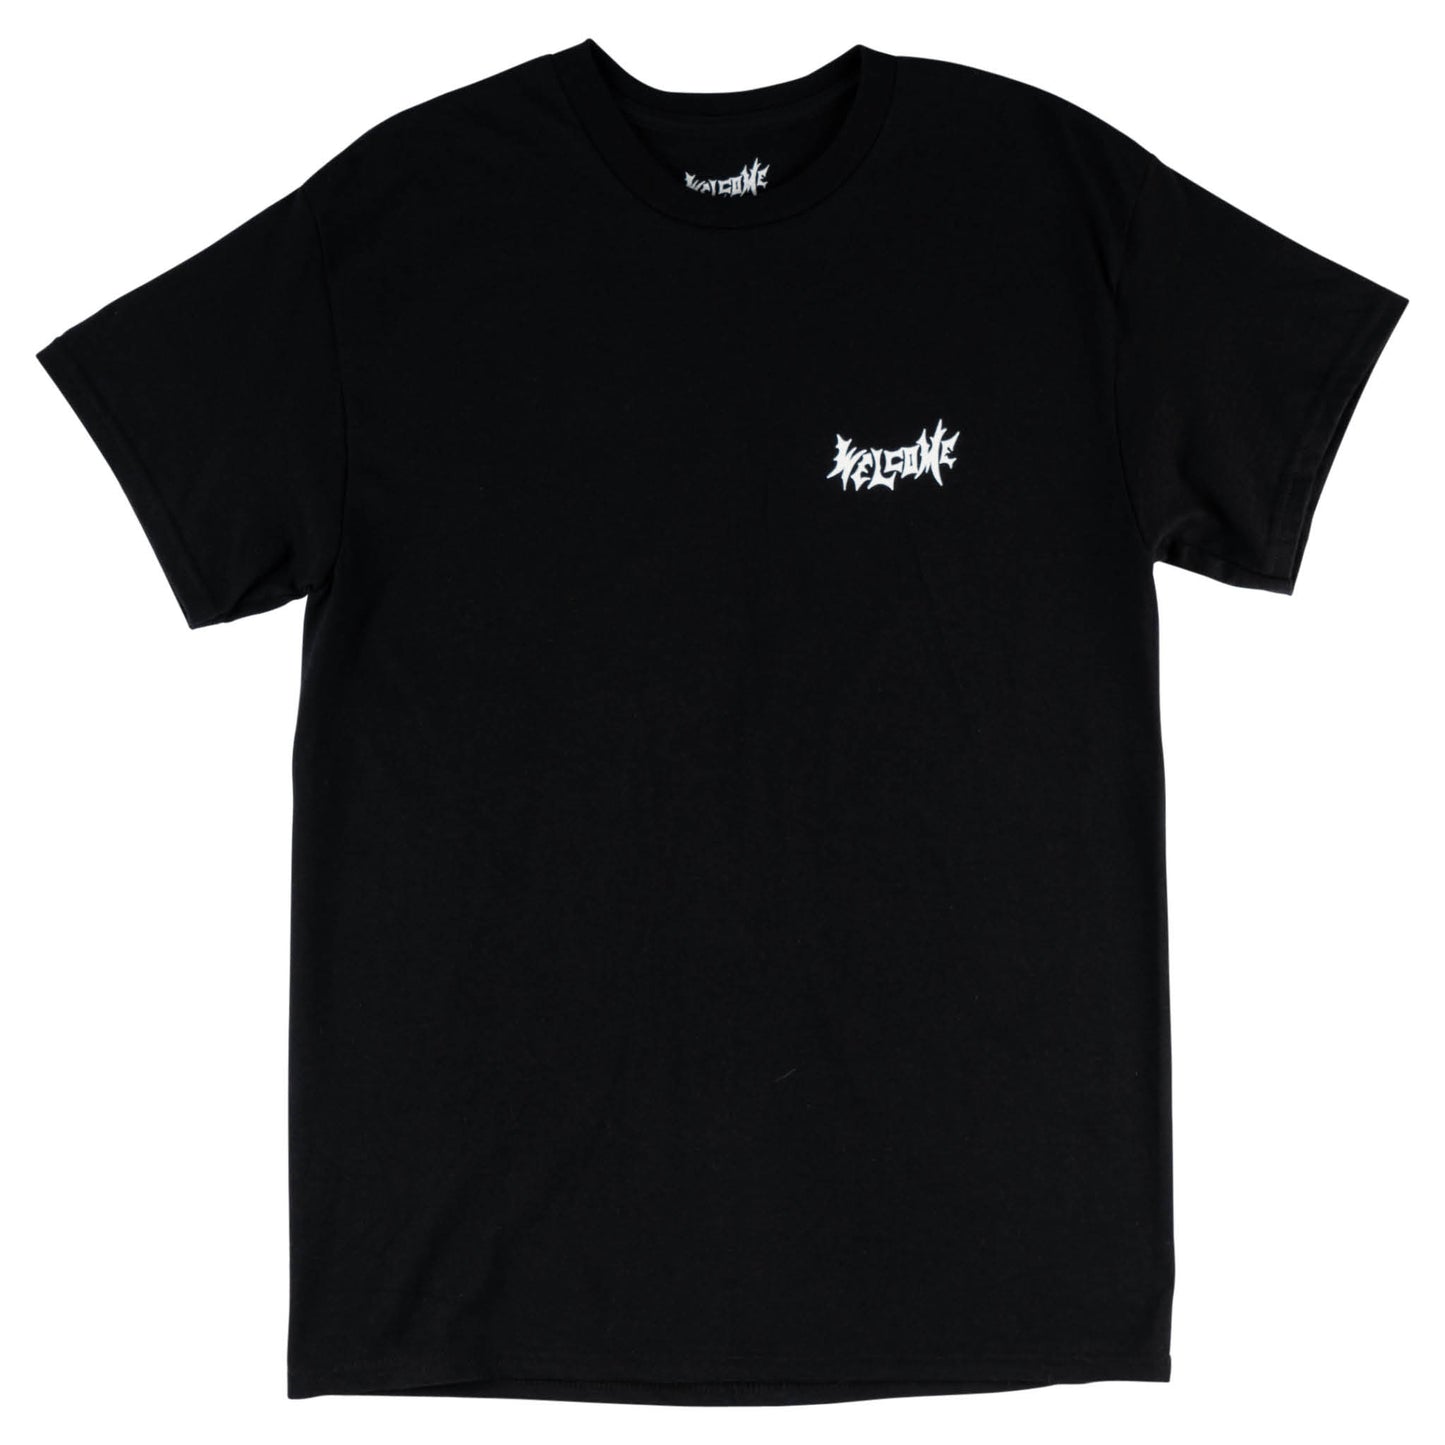 Welcome Nephilim Short Sleeve T-shirt - Black